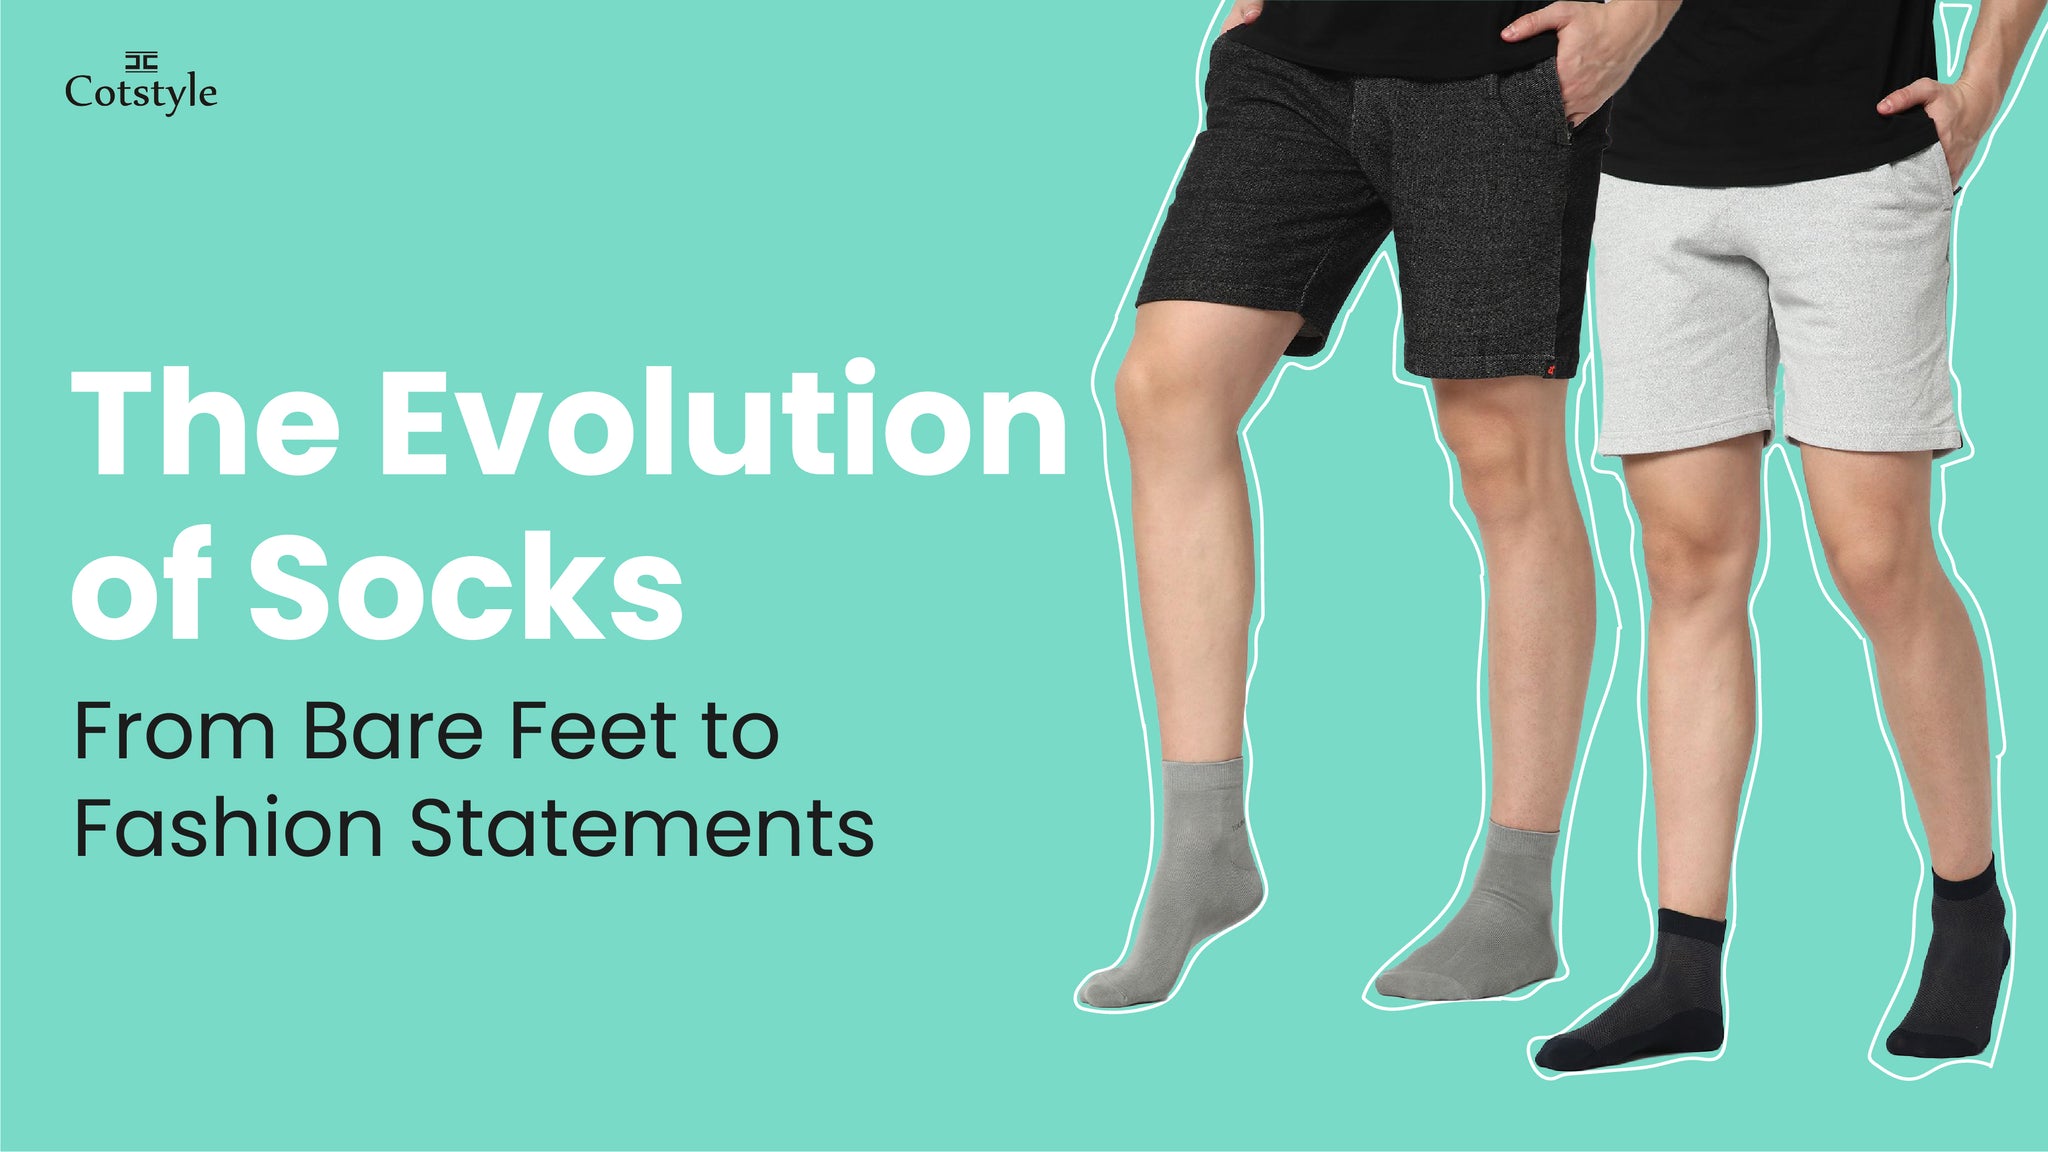 From Bare Feet to Fashion Statements: The Evolution of Socks